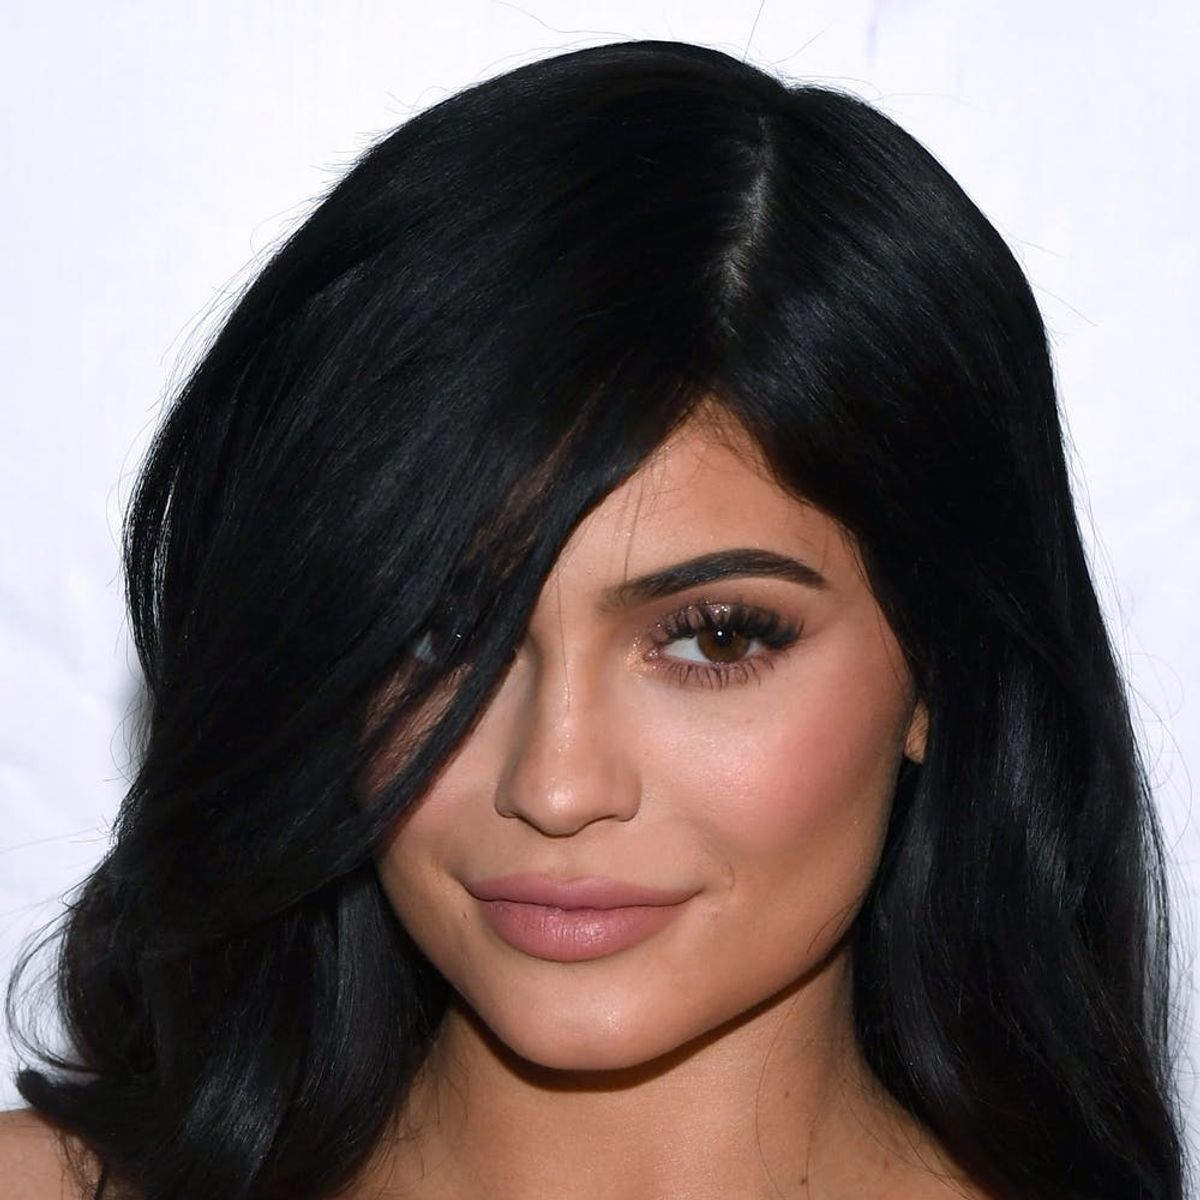 Kylie Jenner Went All-Out Barbie for Her Latest Photo Shoot